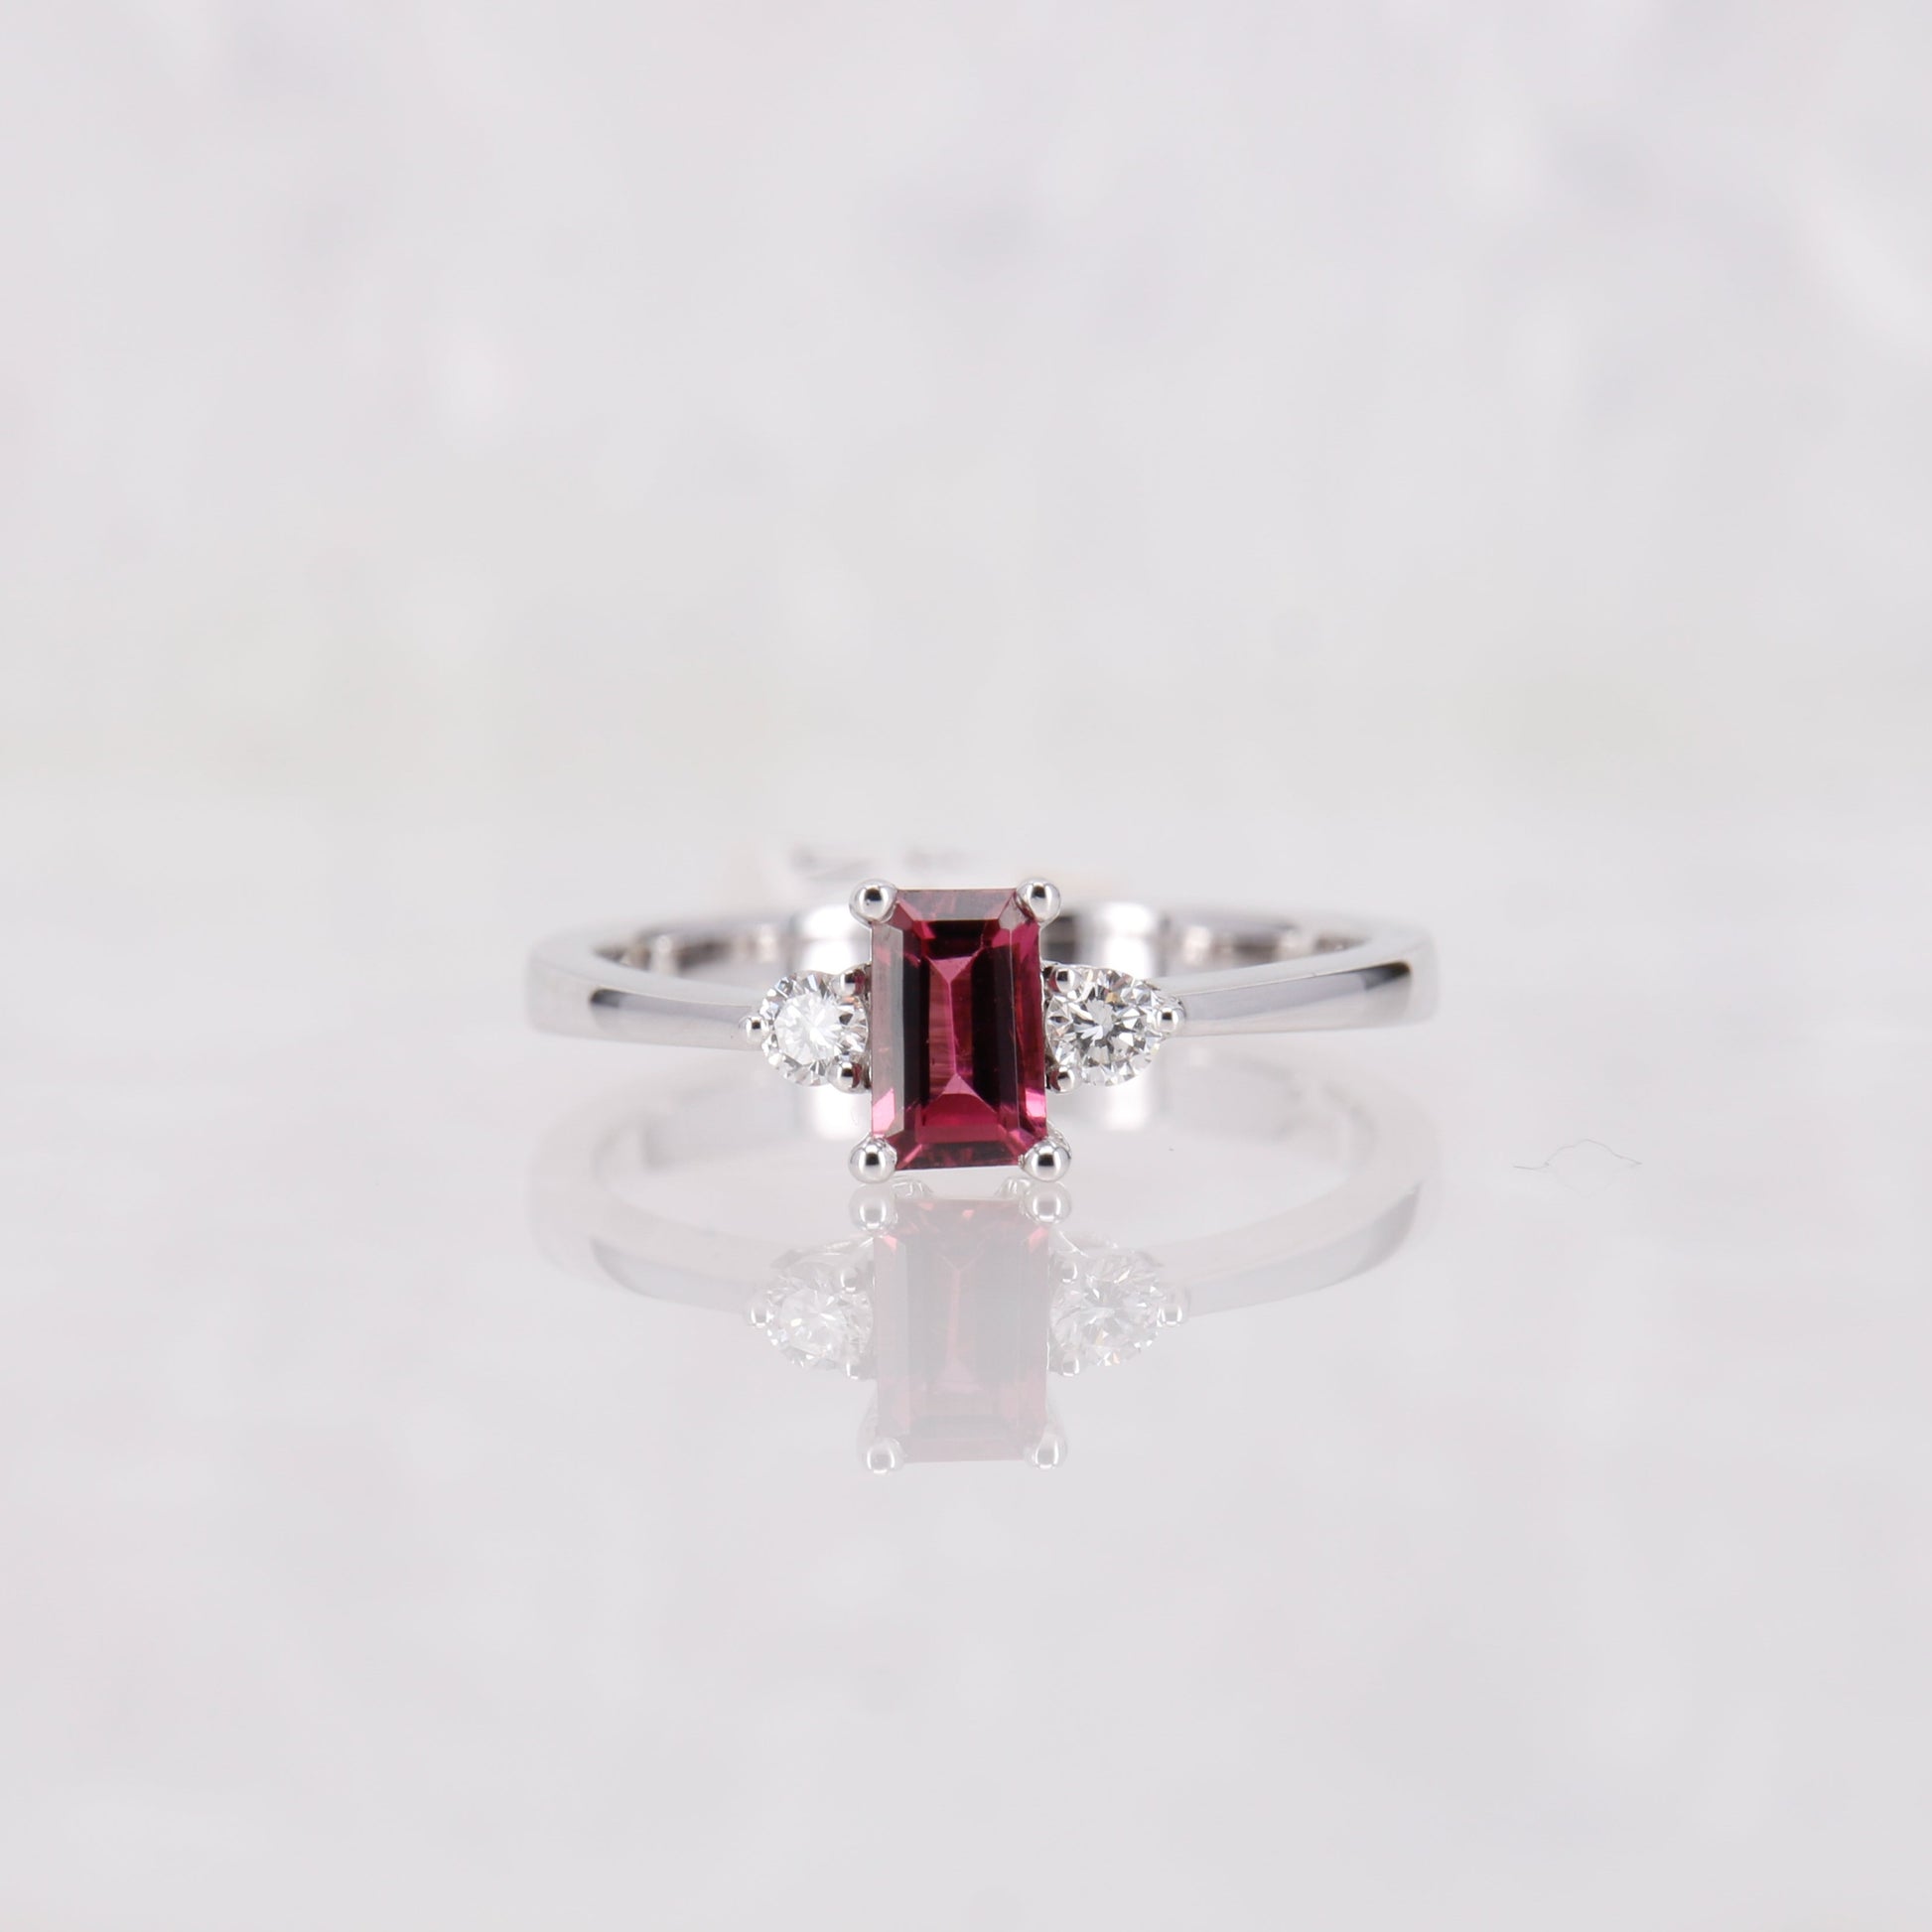 Pink Tourmaline and Diamond Ring. Set in 18ct white gold. 